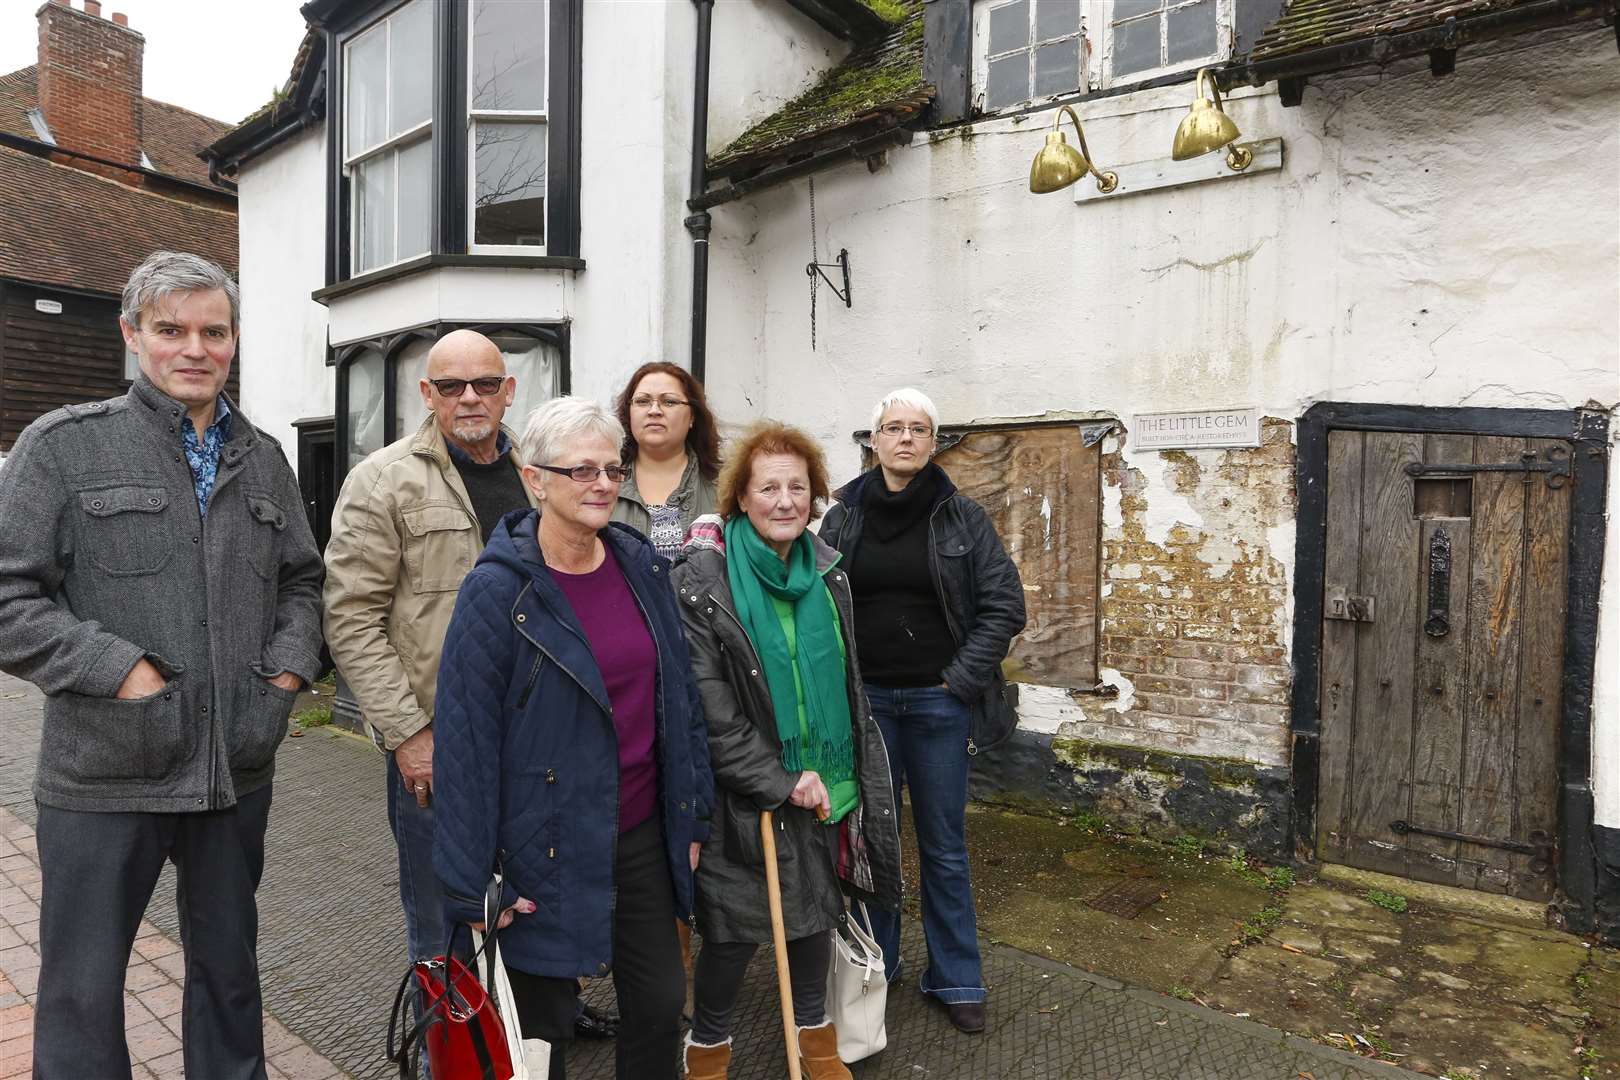 Villagers fought to keep the Little Gem as a pub